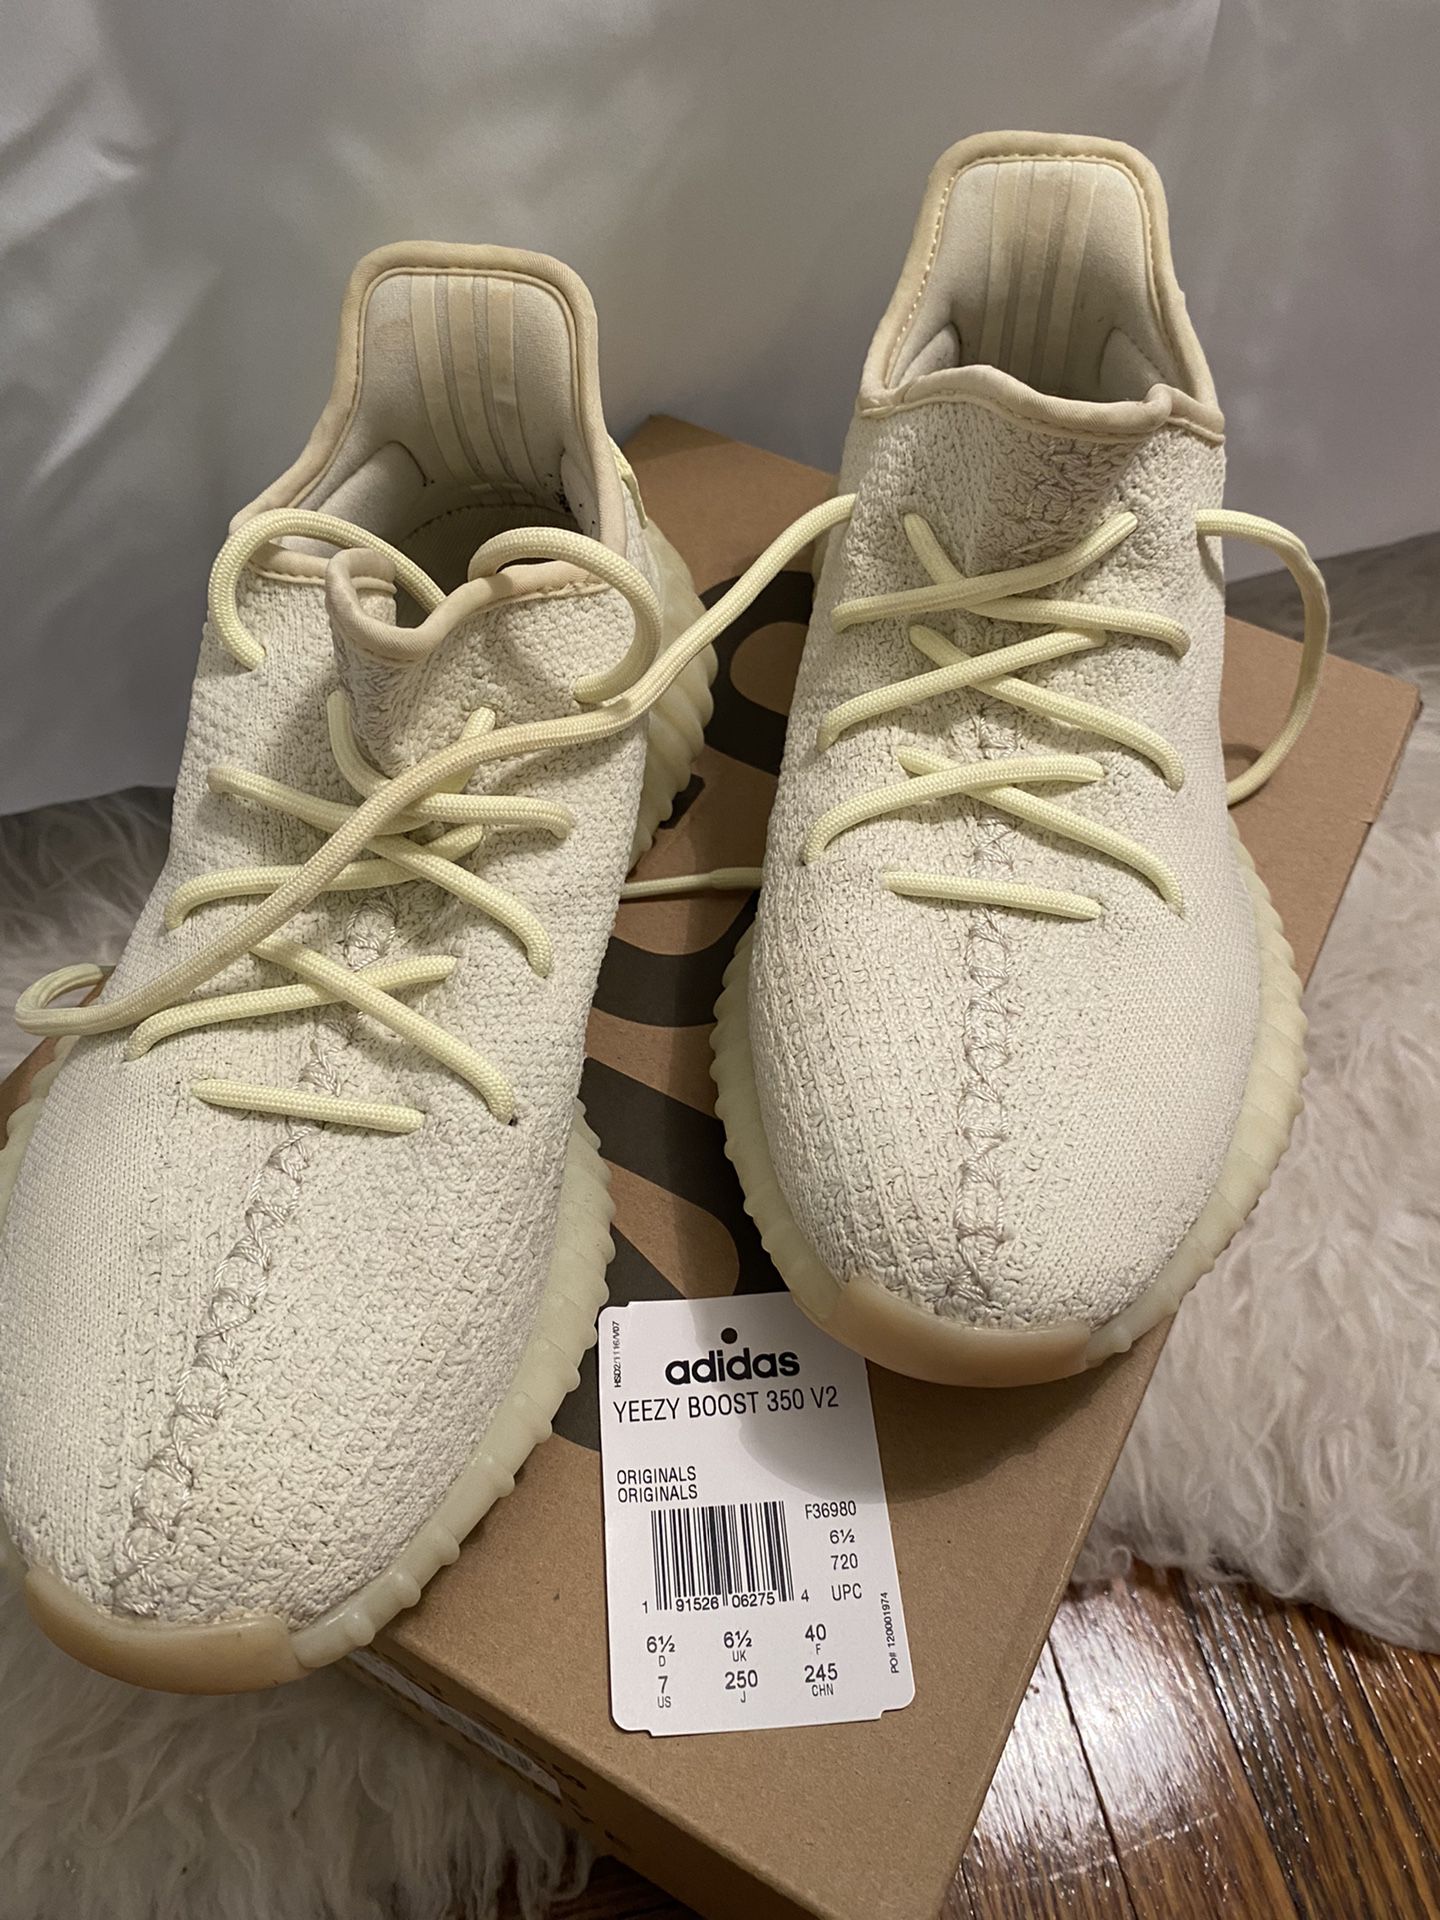 arpón Custodio Cabeza adidas Yeezy Boost 350 V2 Butter, Size US 7 for Sale in Brooklyn, NY -  OfferUp